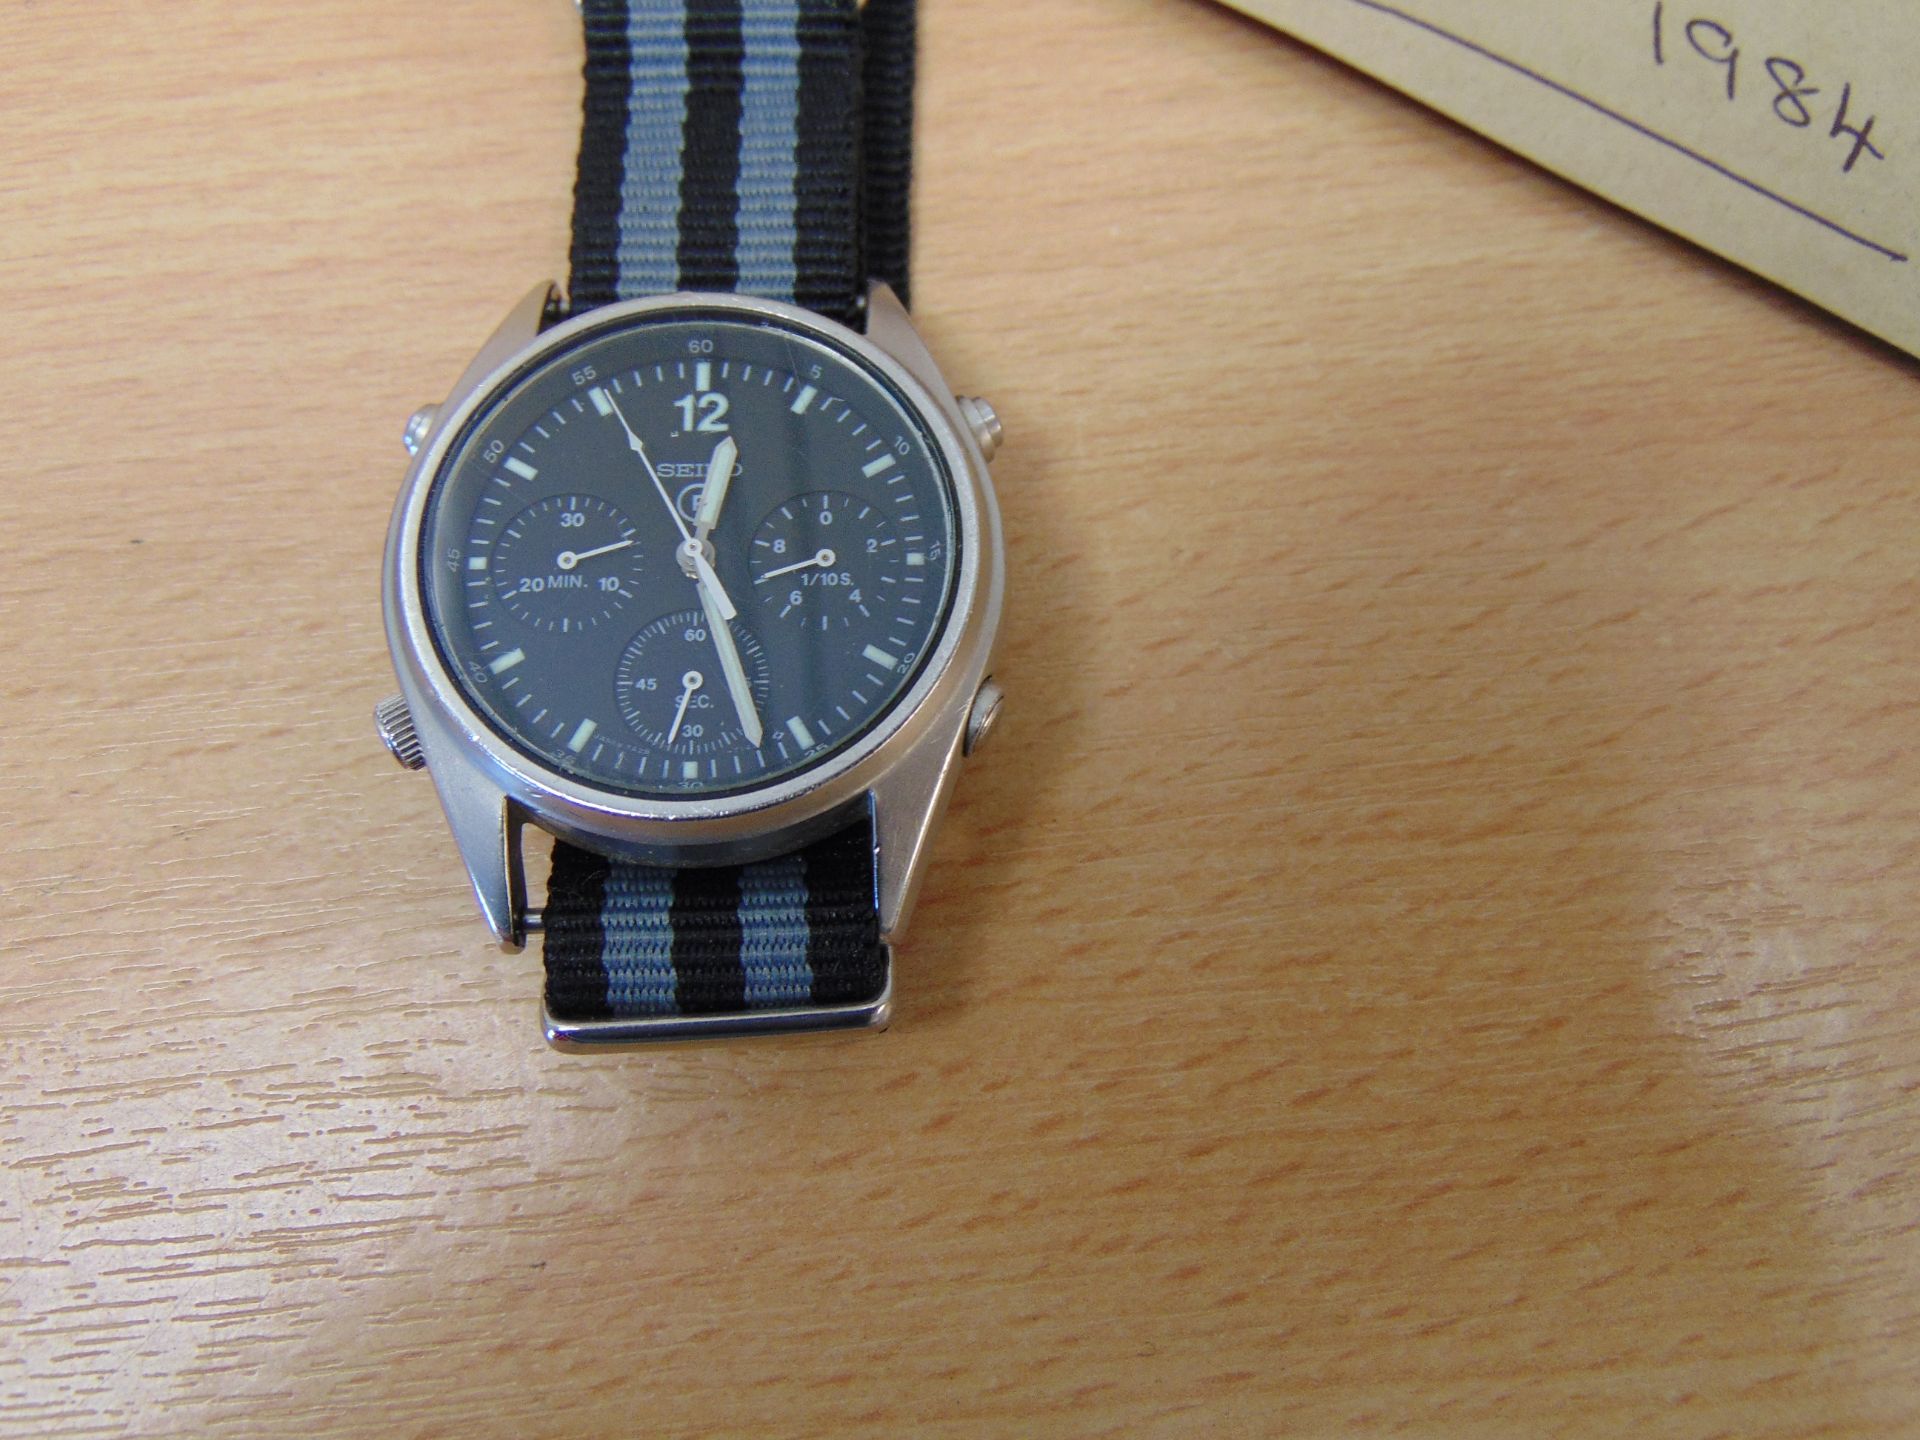 Rare Gen 1 Seiko RAF Pilots Chrono Harrier Force Issue Nato Marks, Dated 1984 - Image 2 of 4